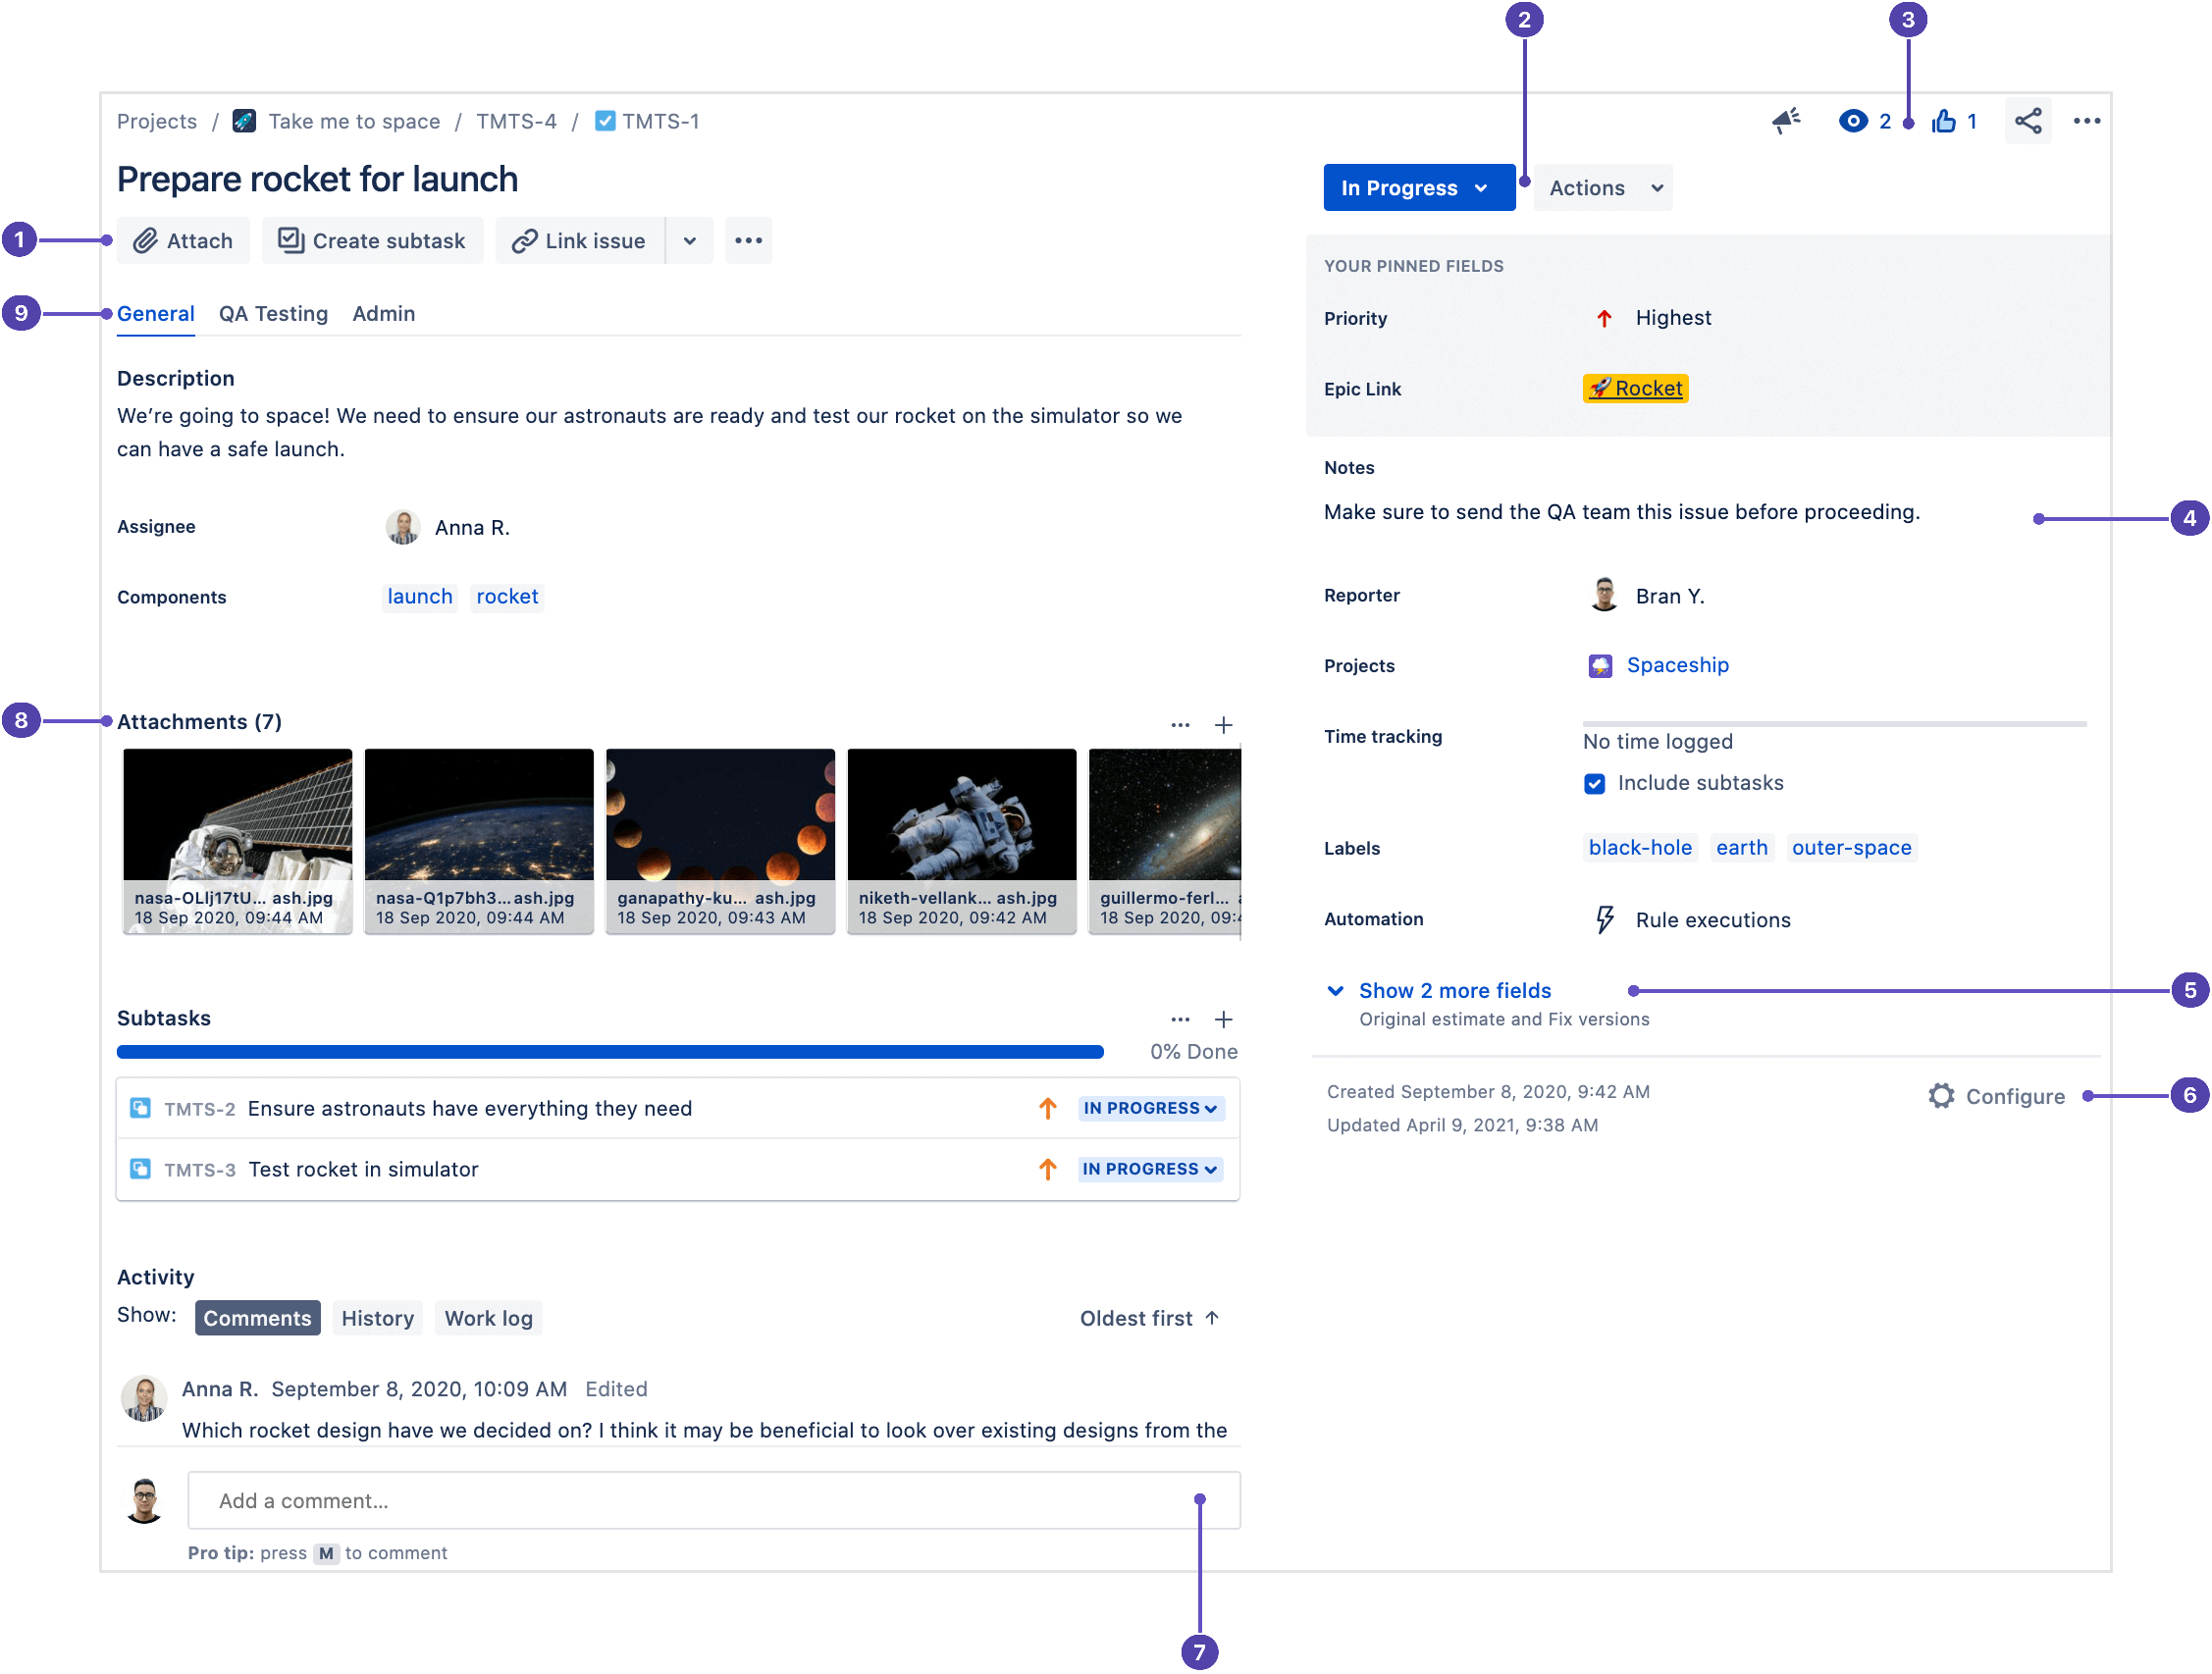 Jira issue view